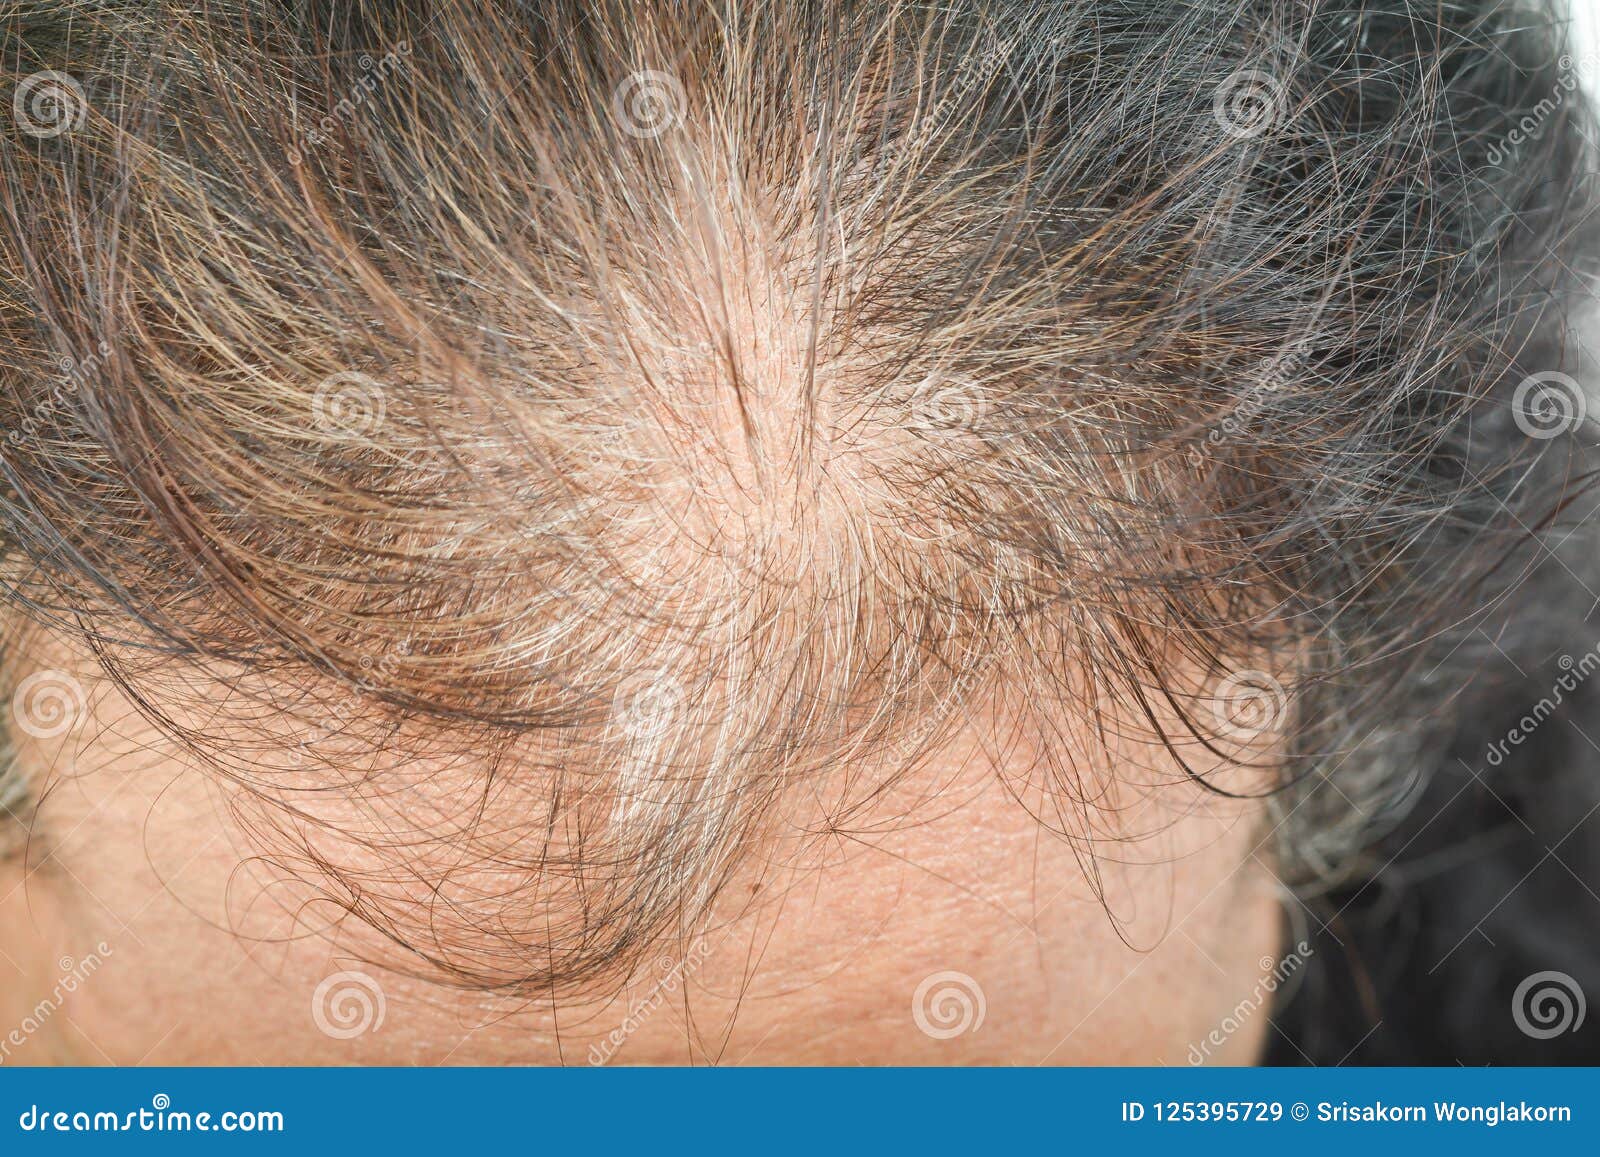 Thin hair in women stock image. Image of loss, care - 125395729